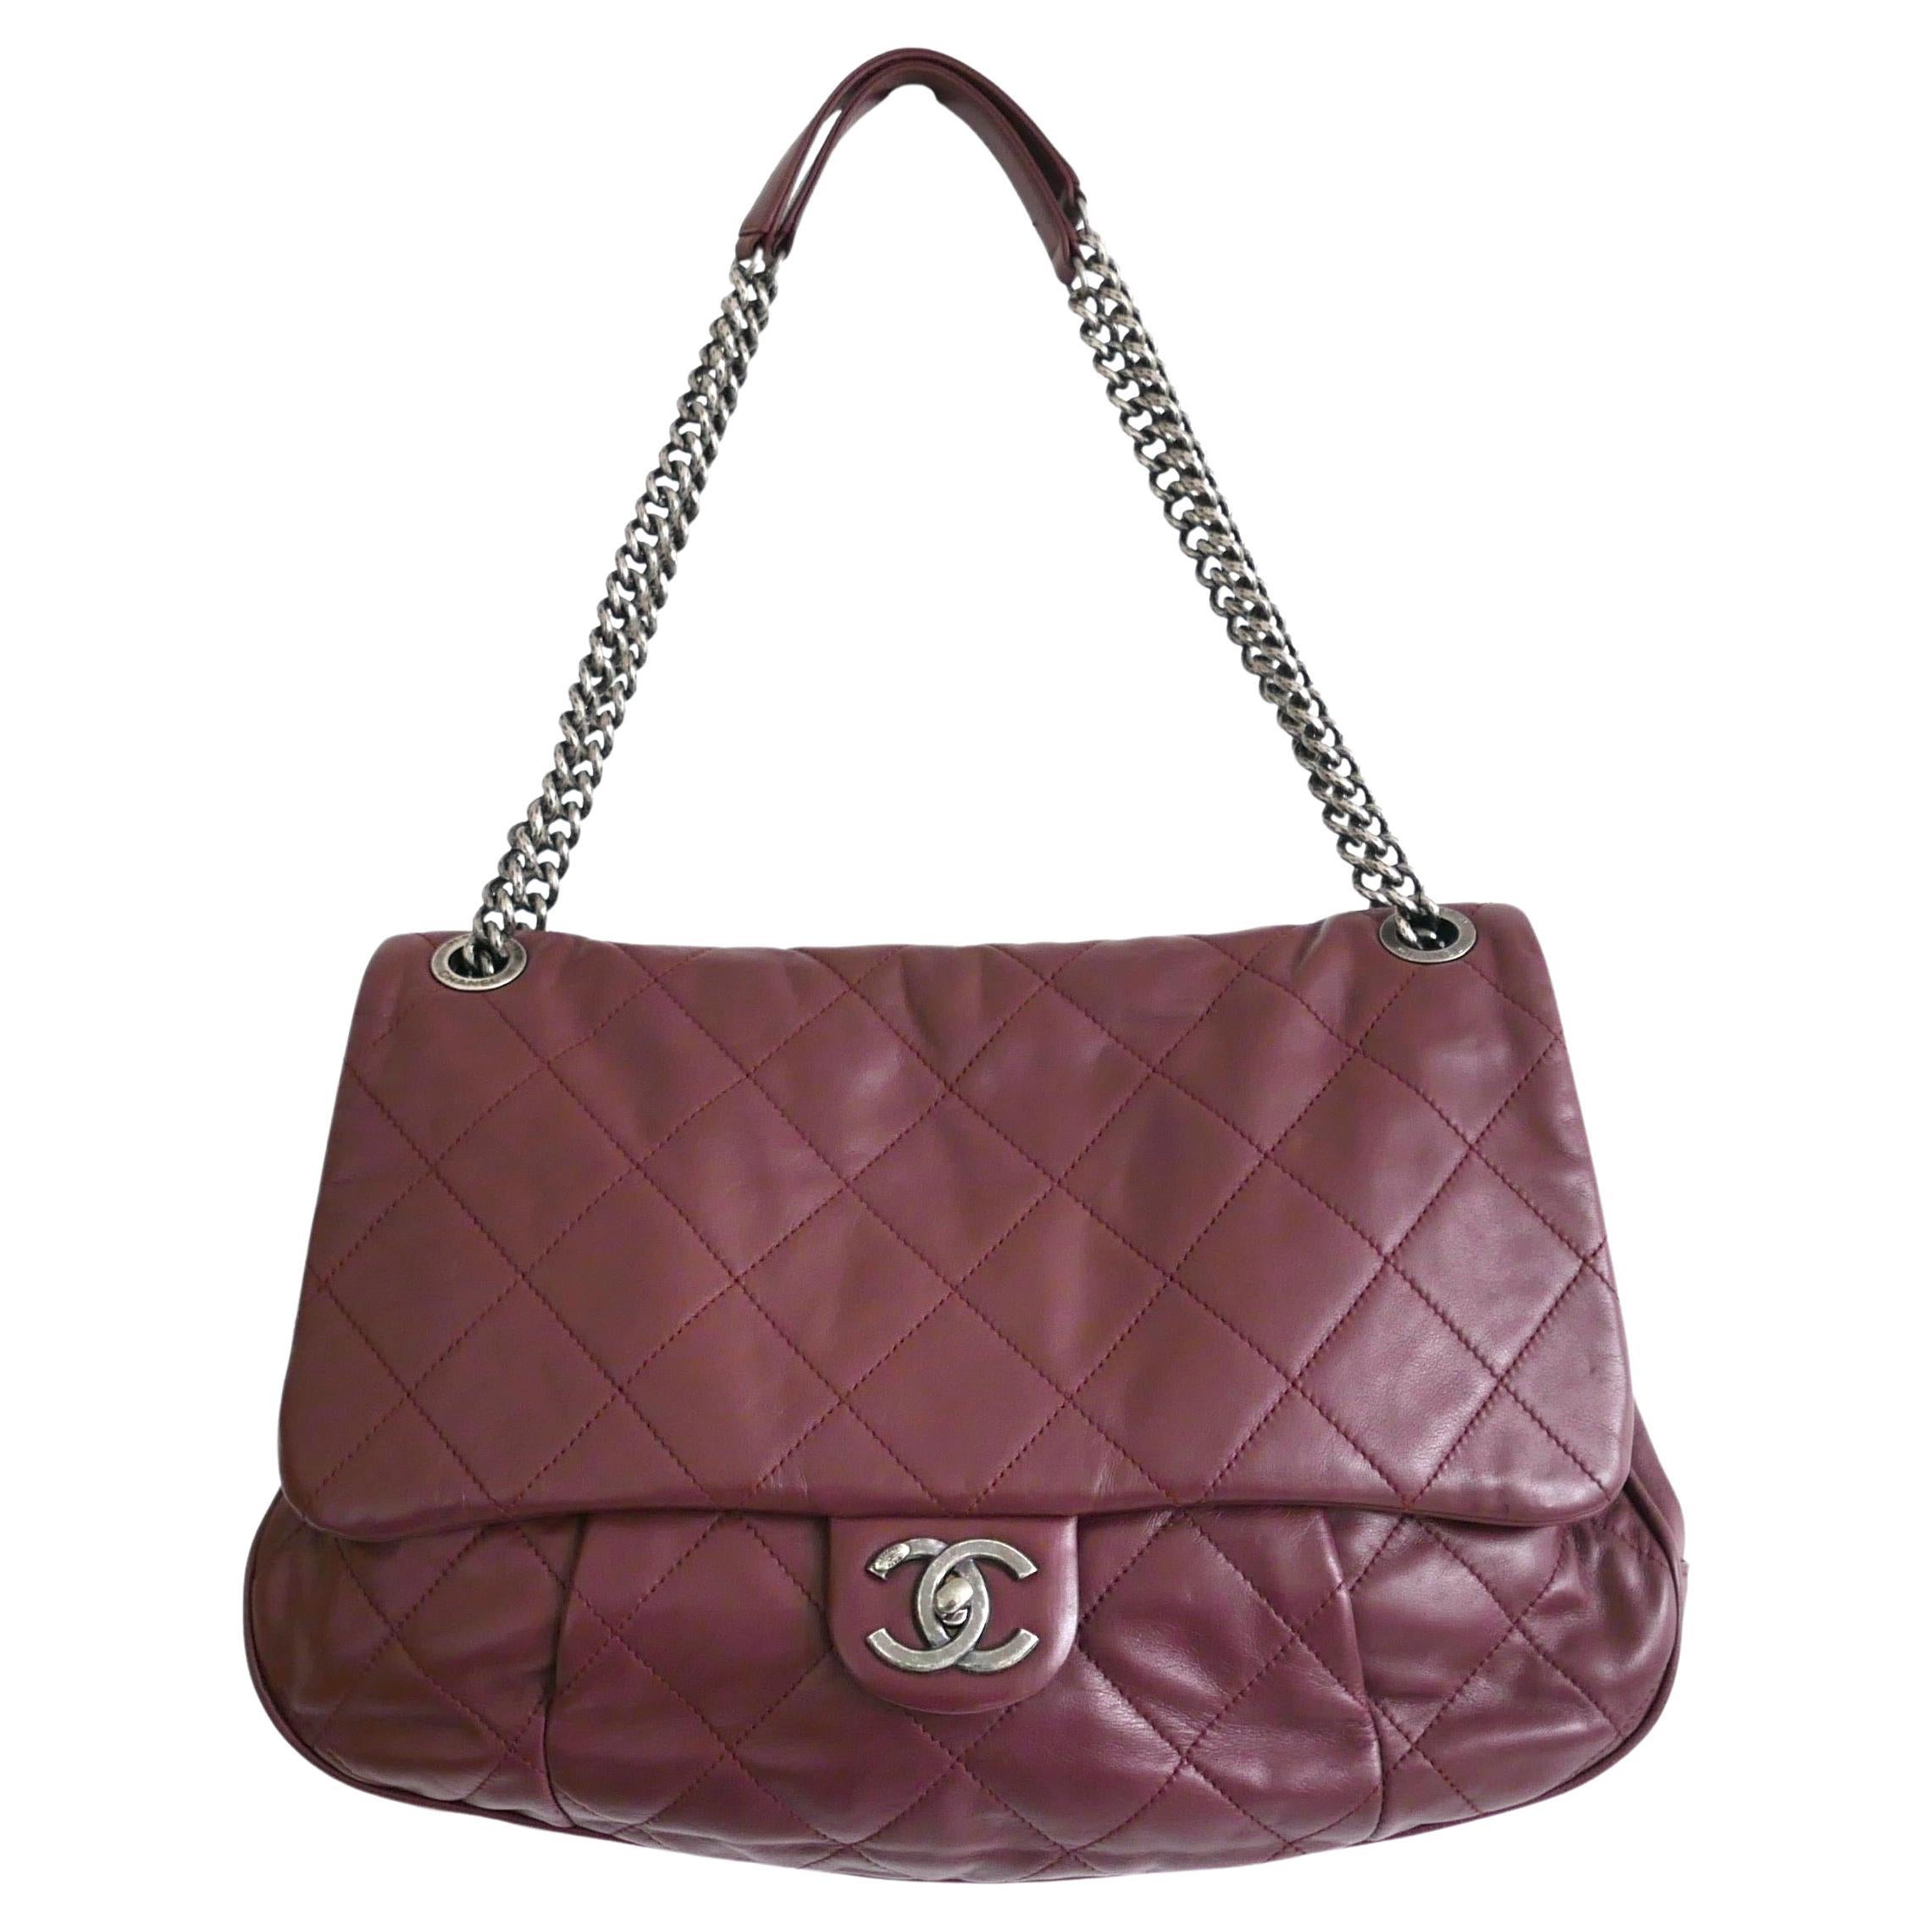 Chanel Coco Pleats Flap Bag Burgundy Quilted Leather For Sale